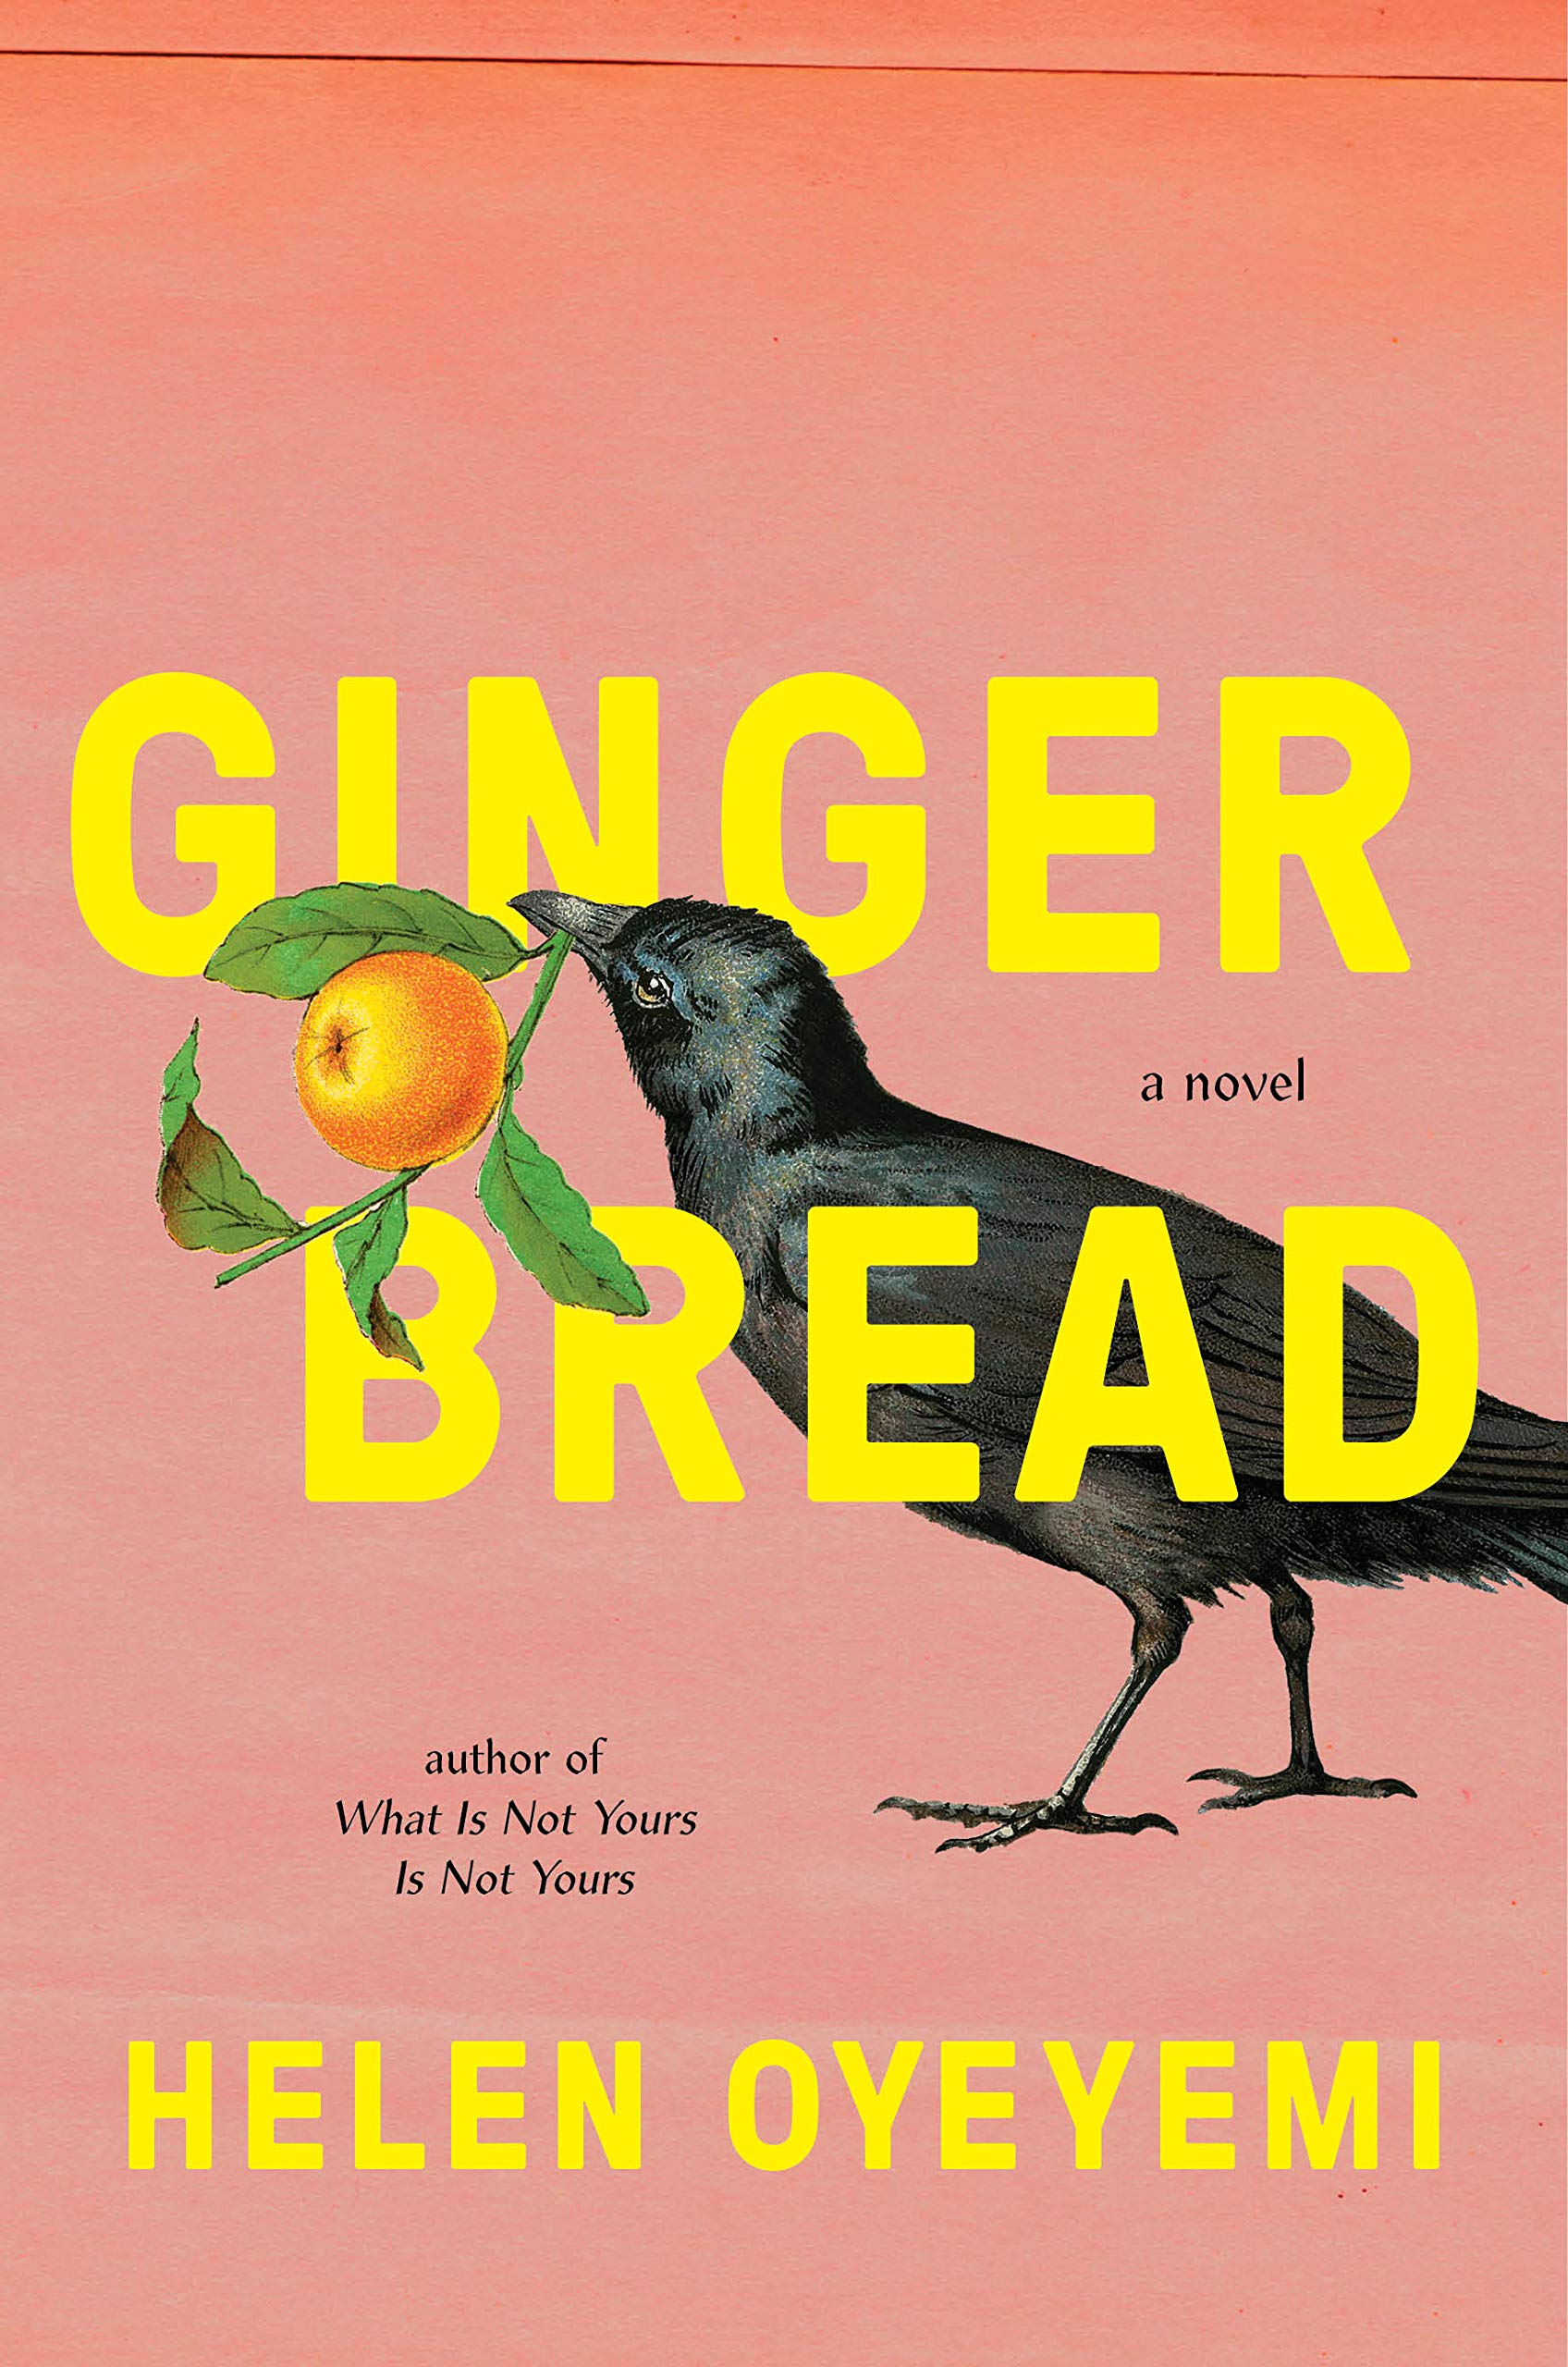 Gingerbread 2019 book releases